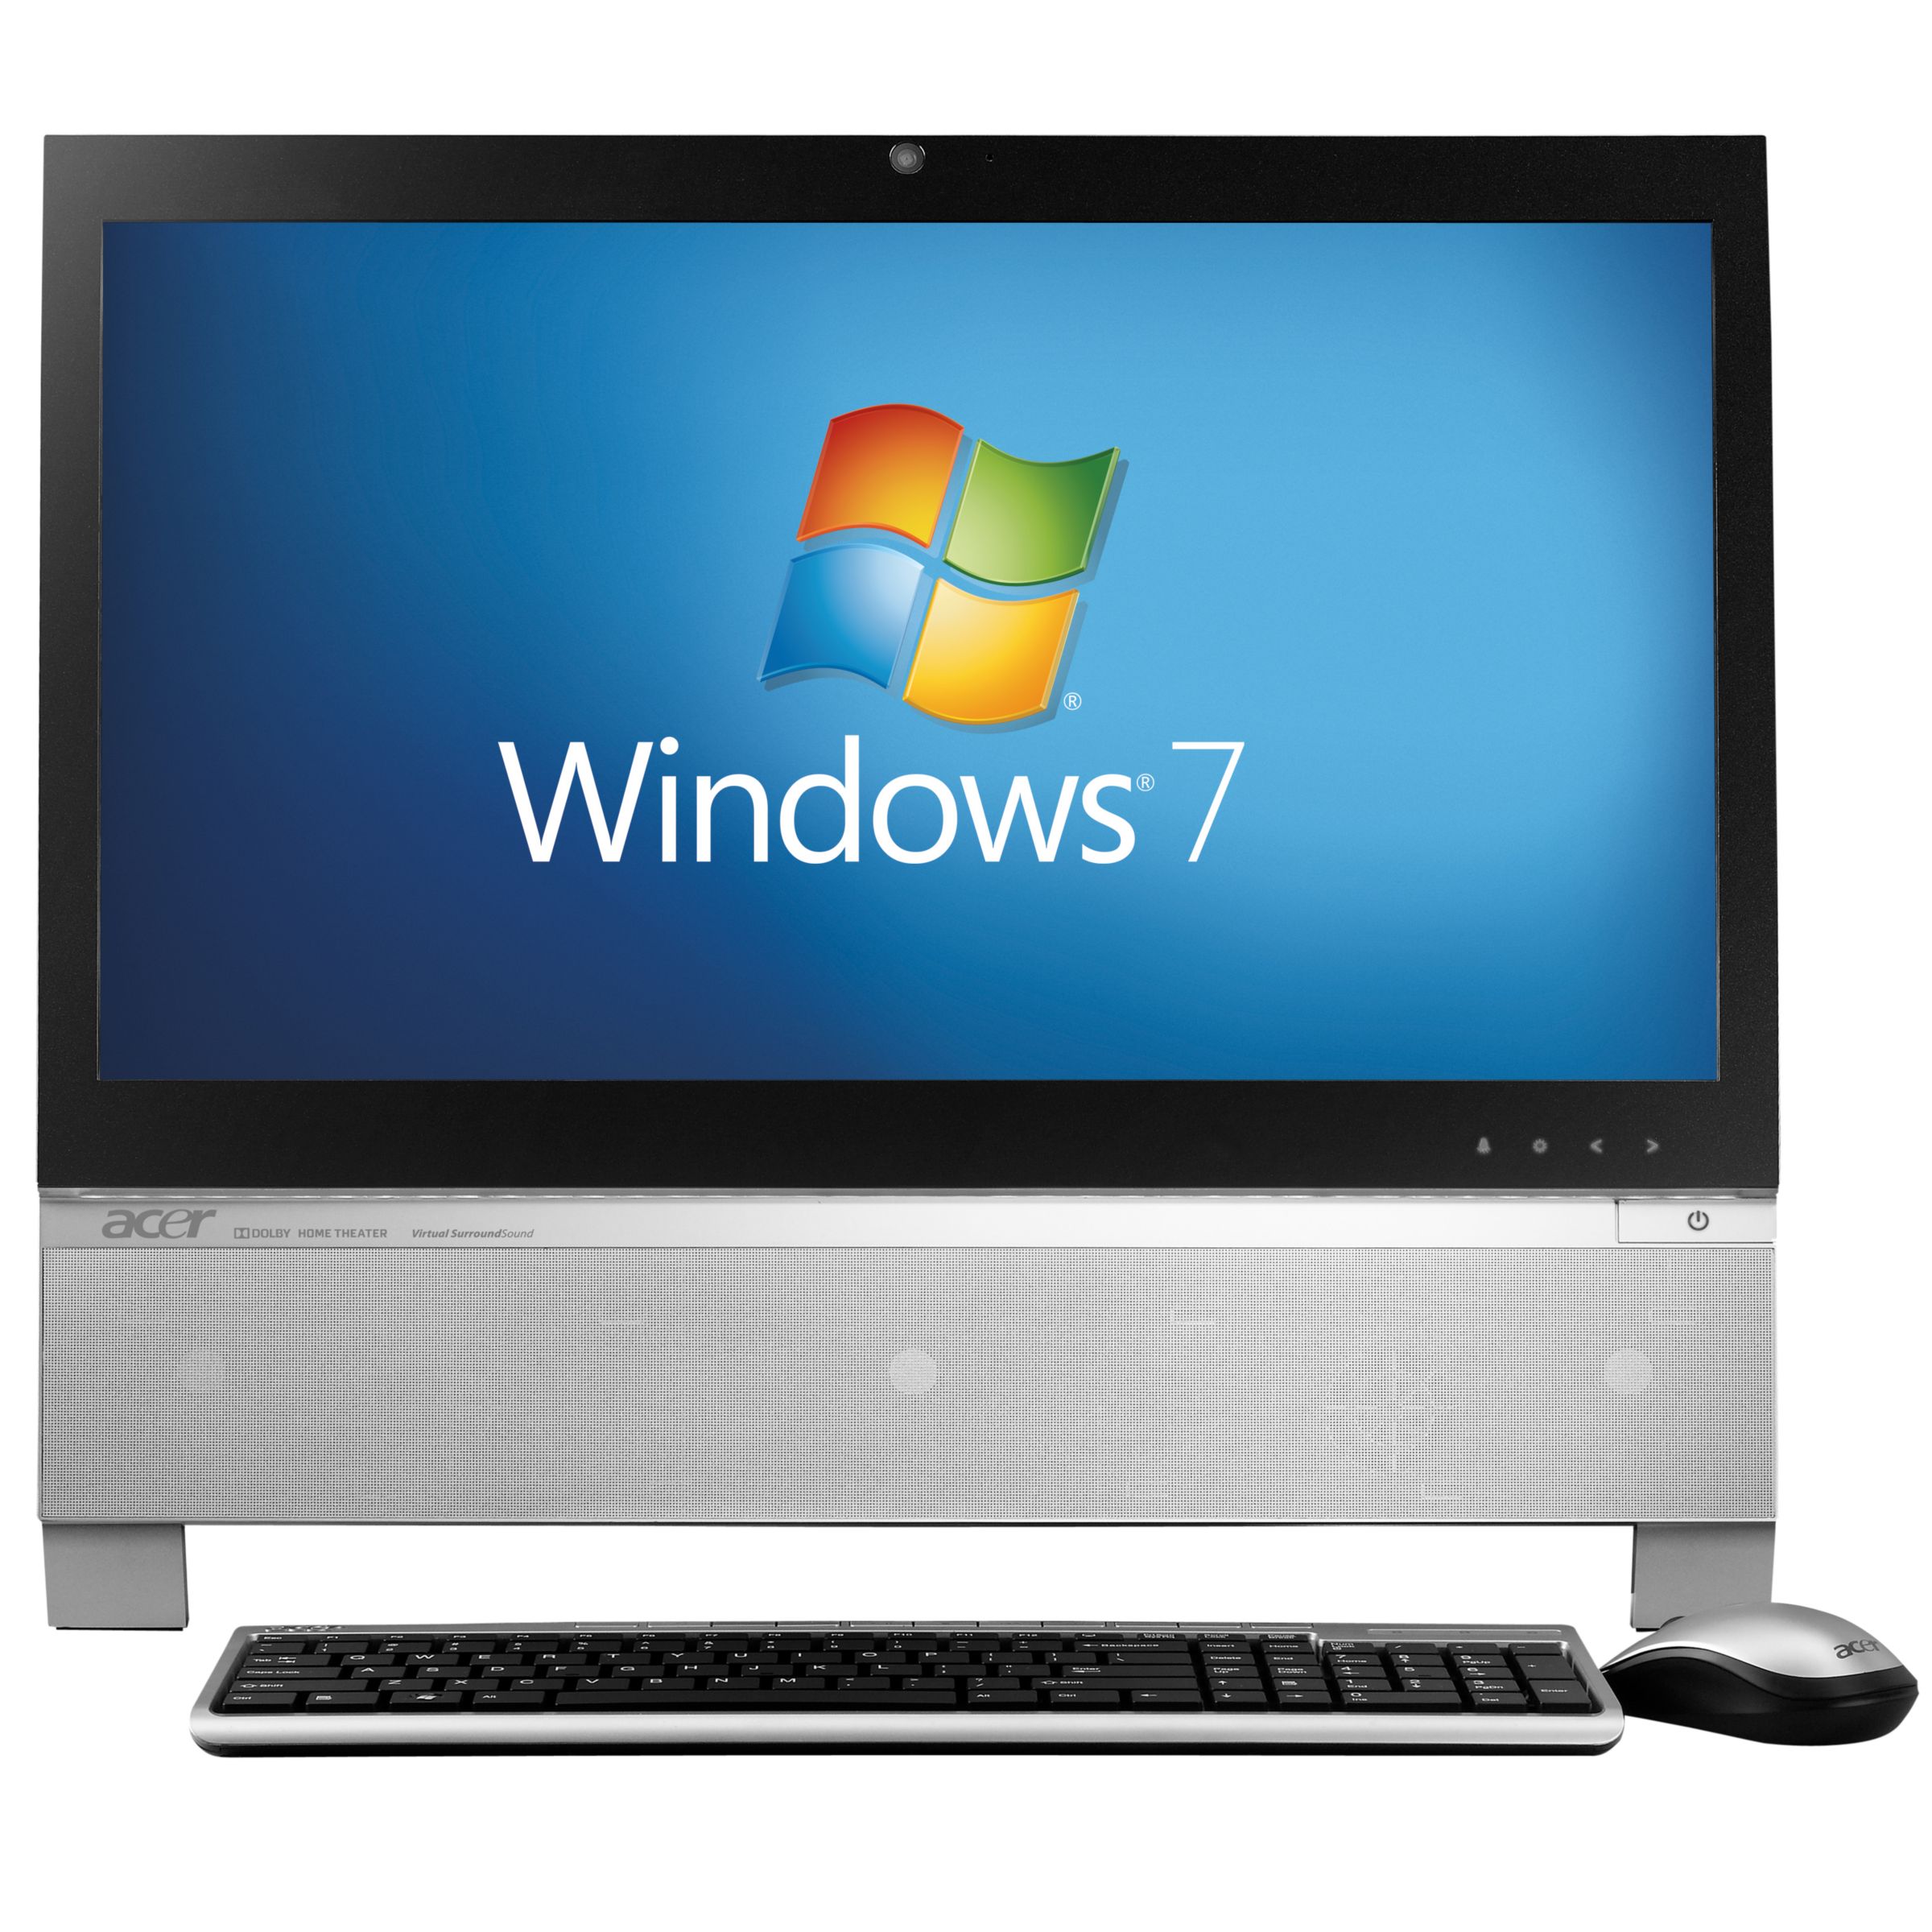 Acer Z3751 Desktop PC with 21.5 Inch Touch Screen at John Lewis